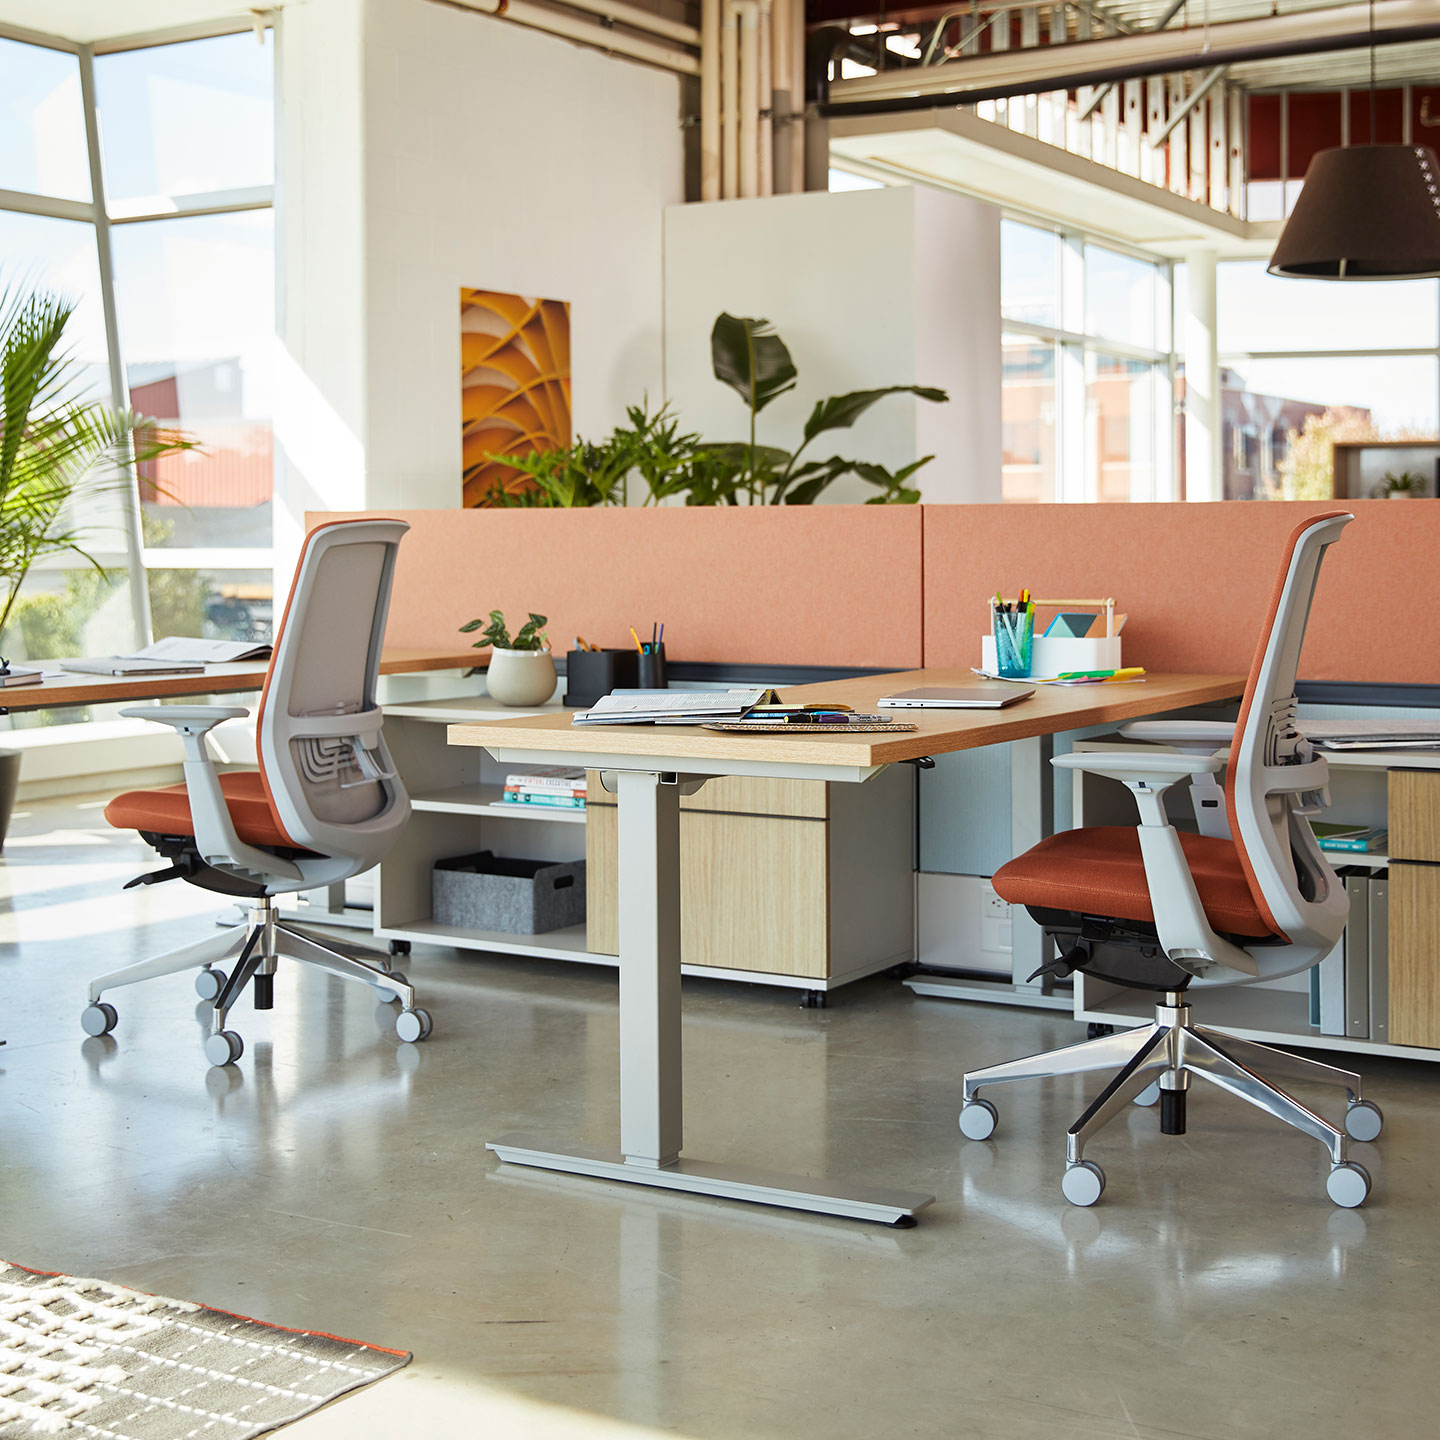 Haworth Height Adjustable Table with Fern Seating in an open office space